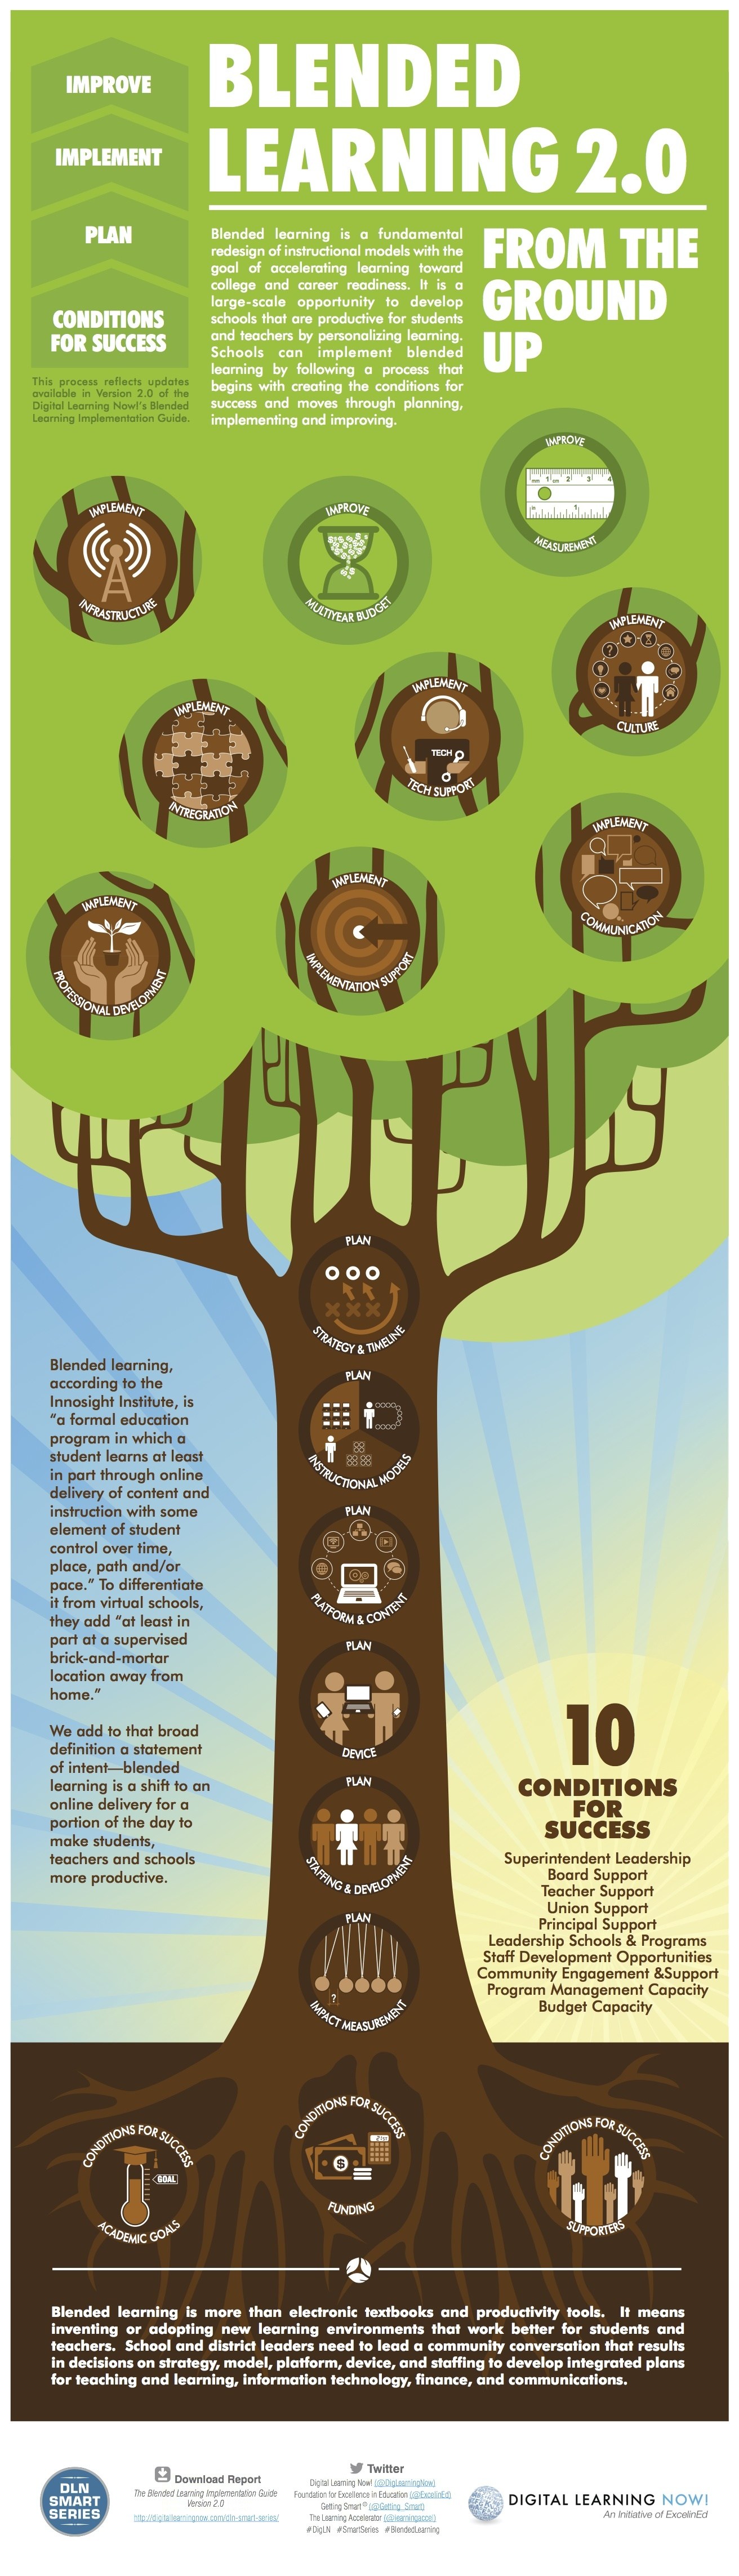 Blended Learning 2.0 Infographic